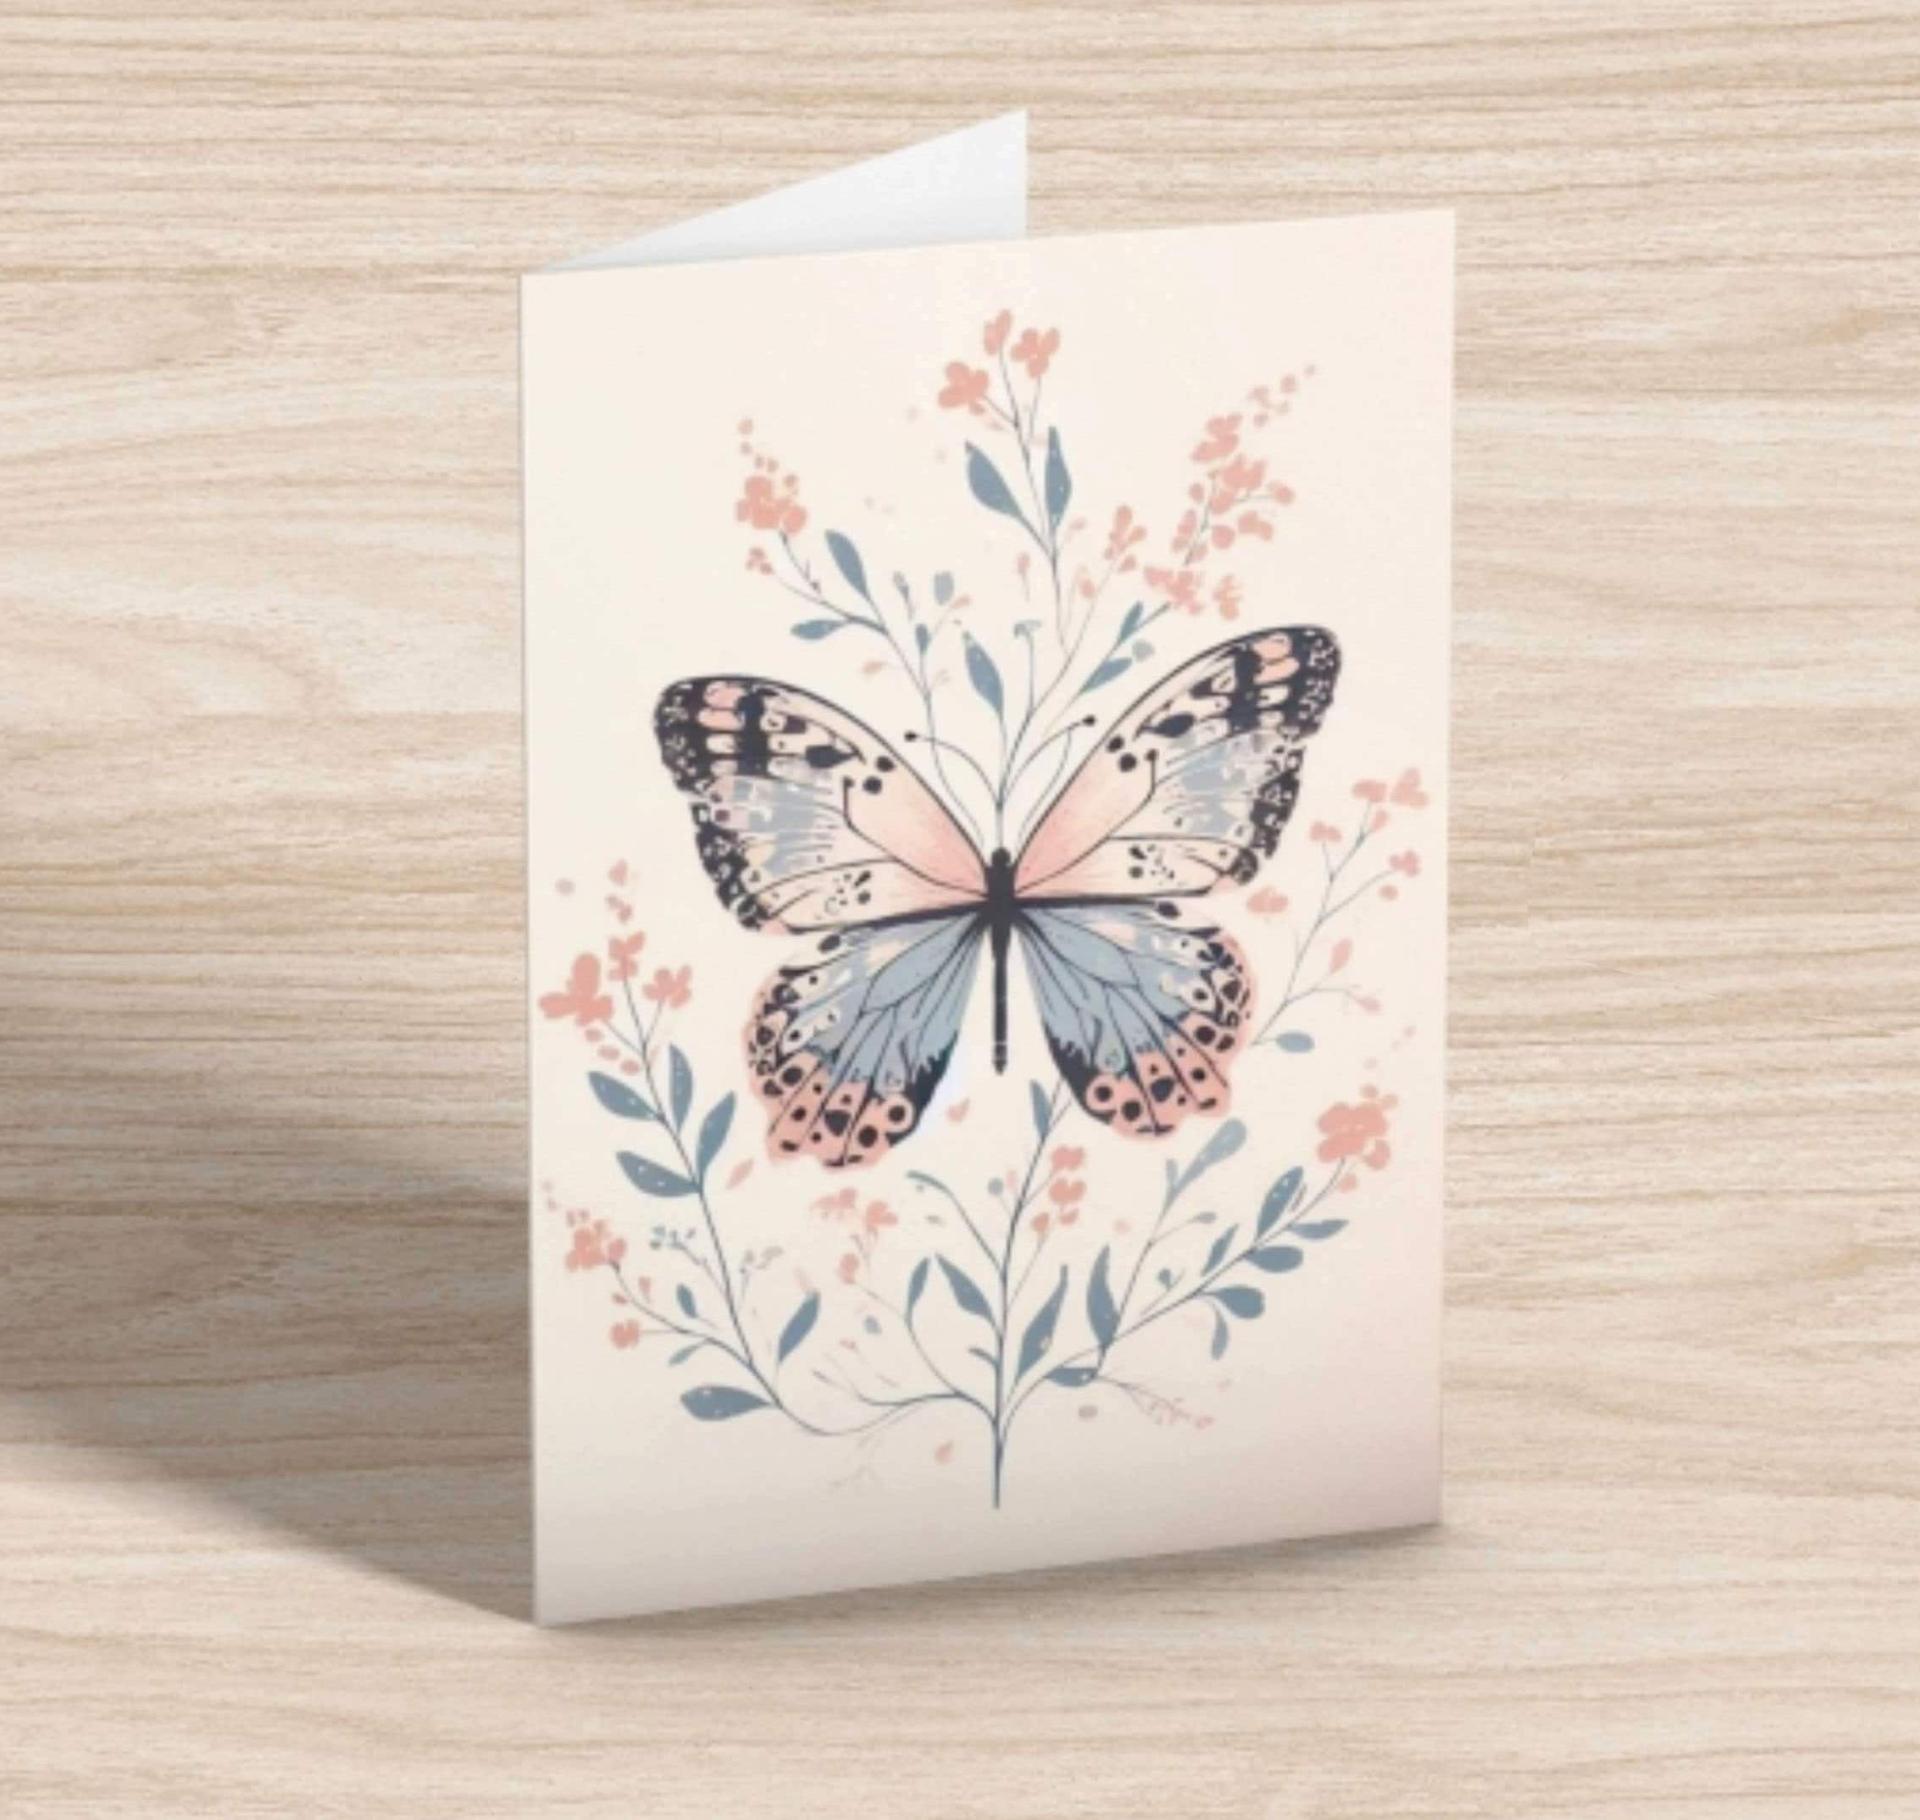 Set of Butterfly Greeting Cards, 4 Designs, Bulk Pack of Cards